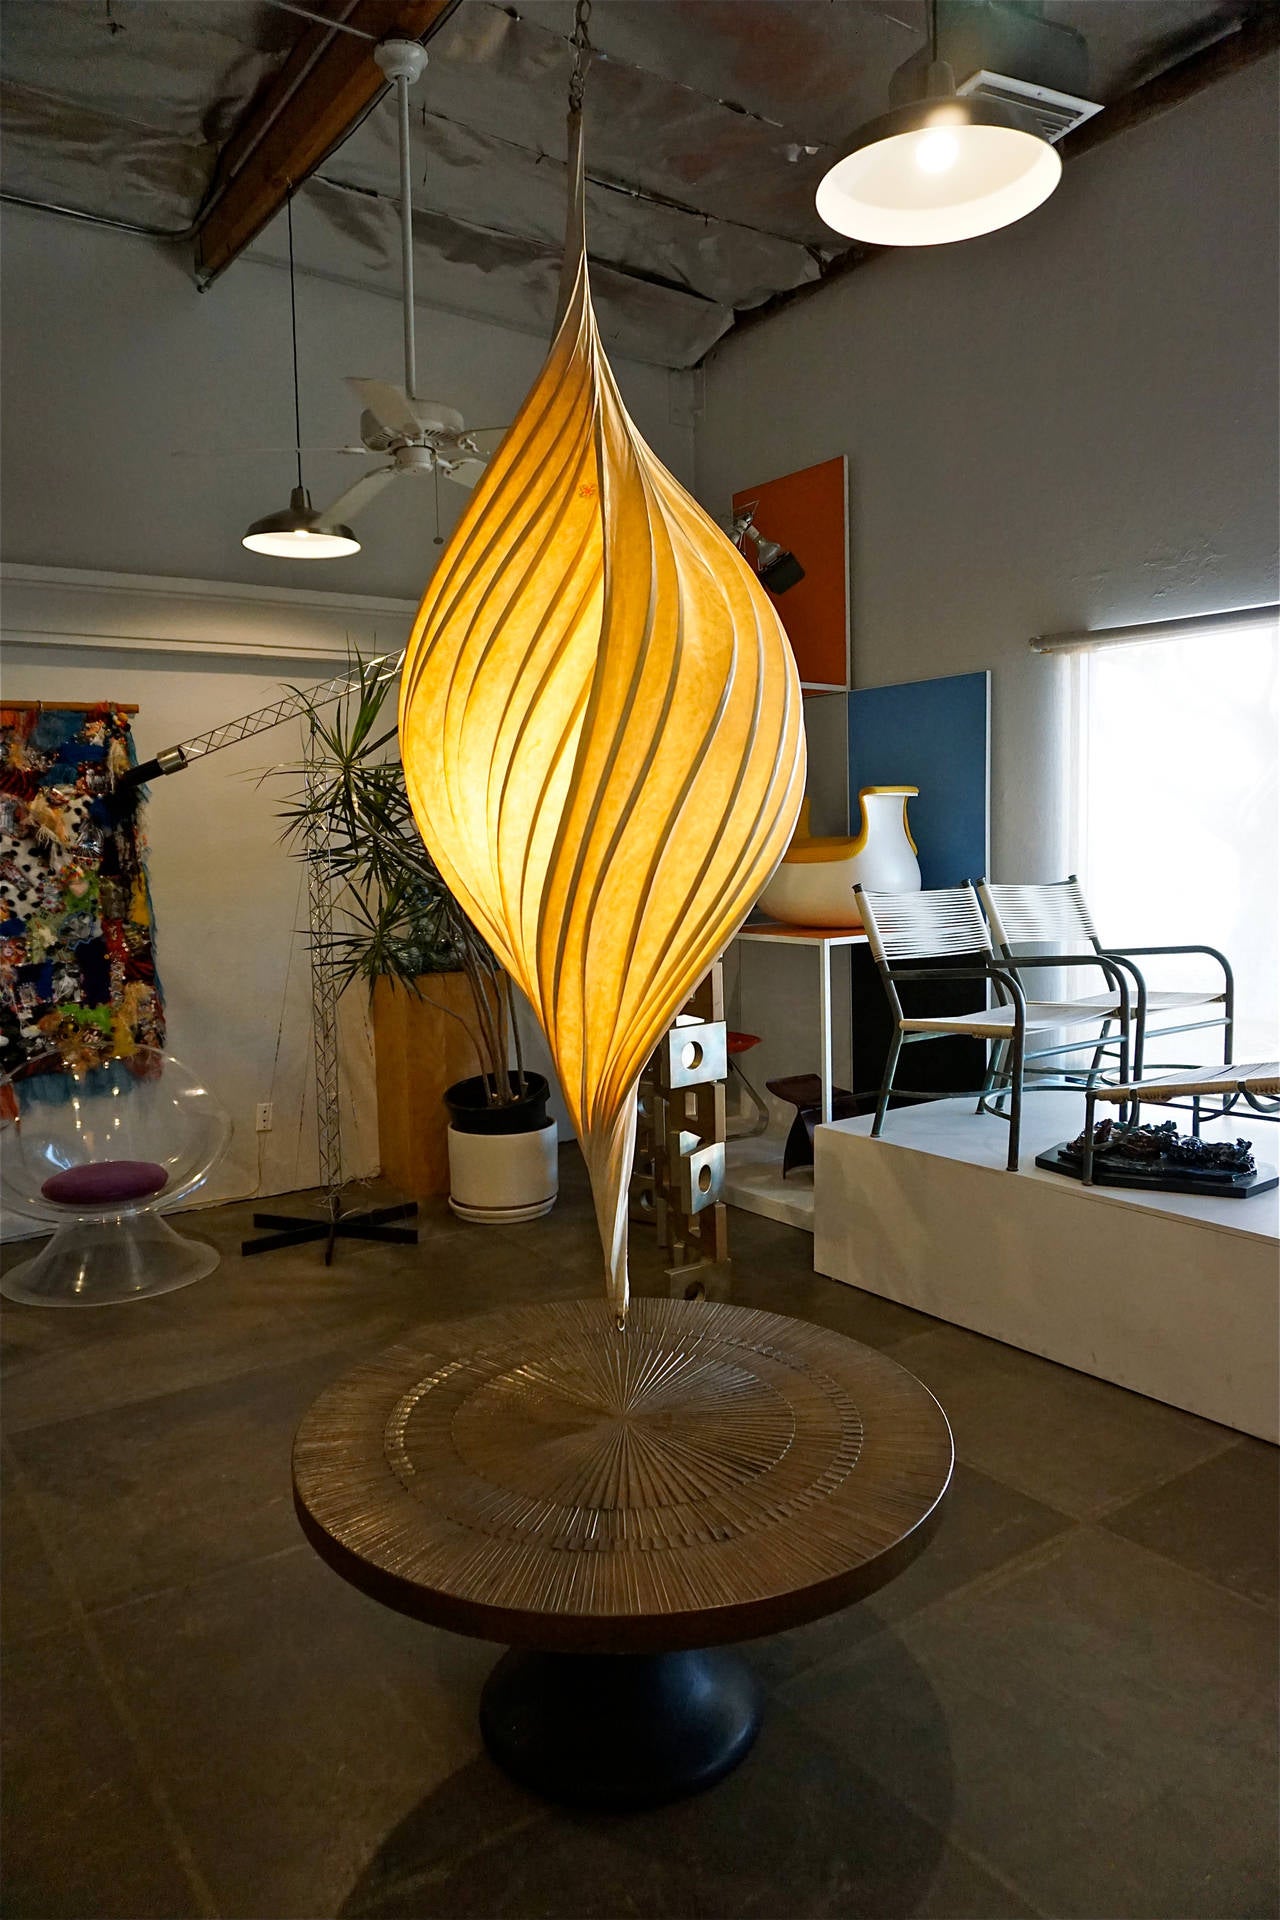 Measuring a full 6 ft. tall, Stephen White creates these one off light sculptures using bentwood and a papier mâché technique using rice paper.